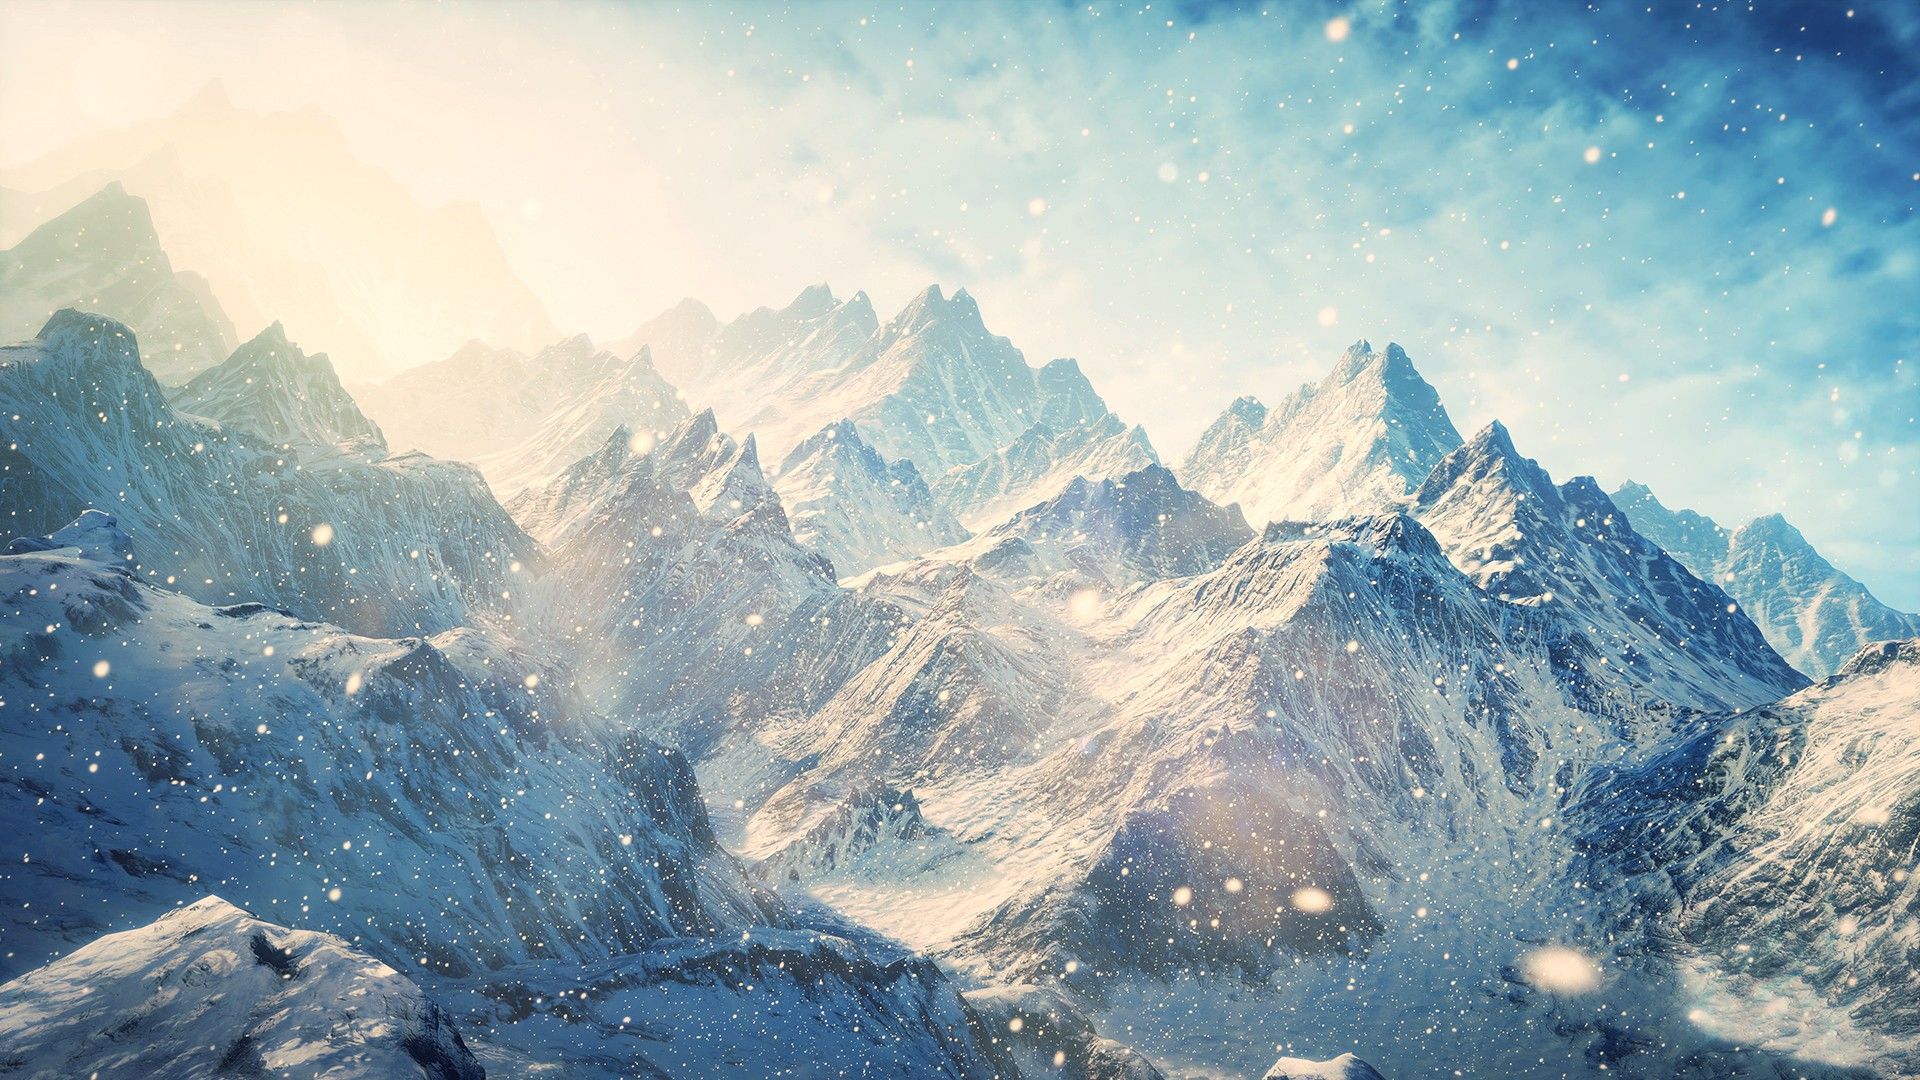 Free download Winter Mountains With Snow HD Wallpaper FullHDWpp